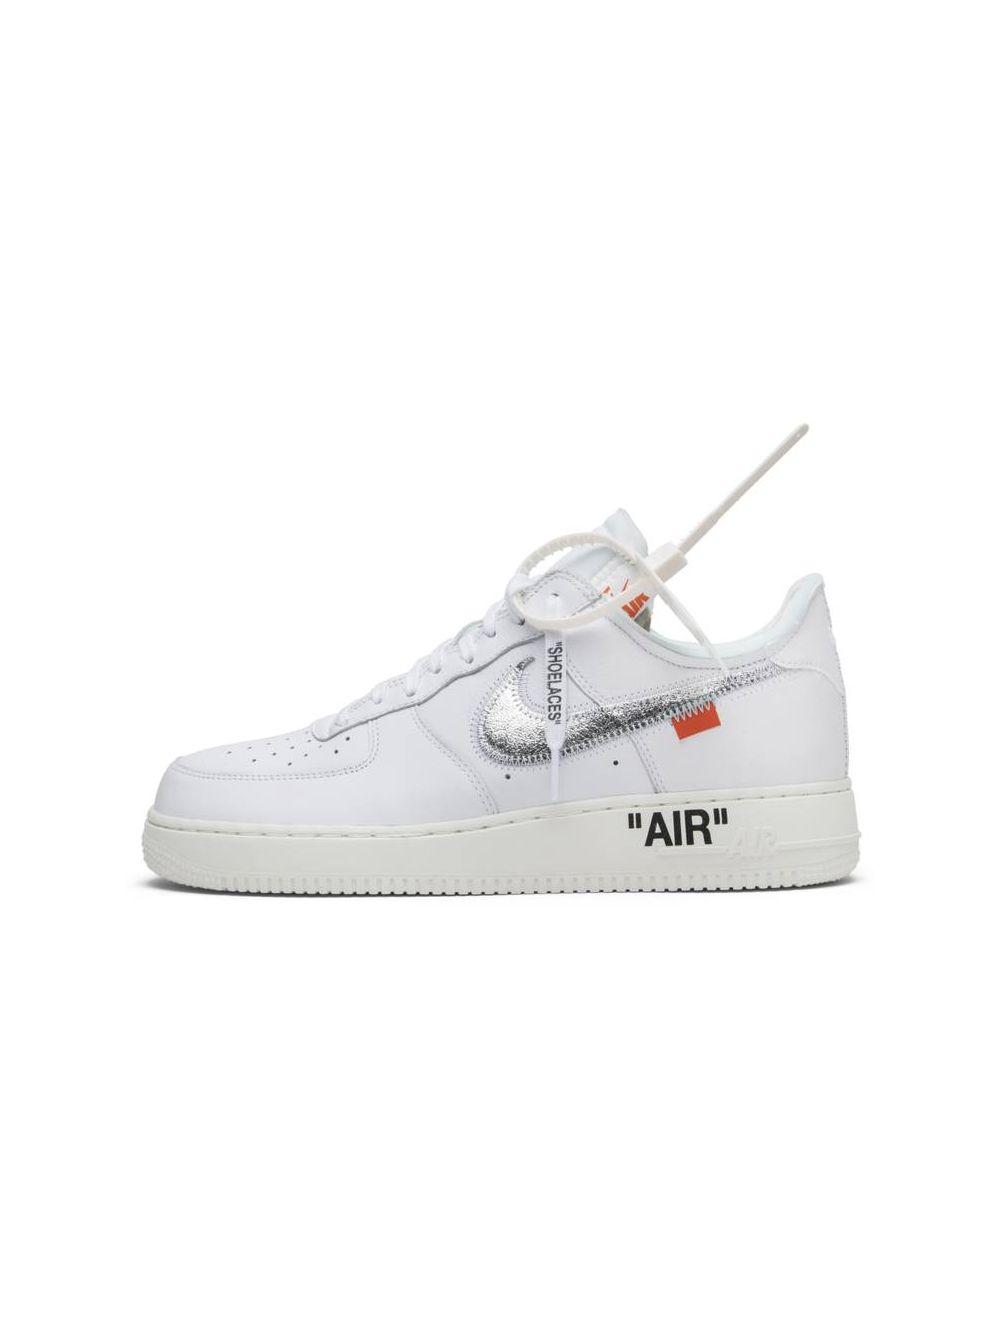 1:1 Fake Off-White Air Force 1 'ComplexCon' AO4297-100